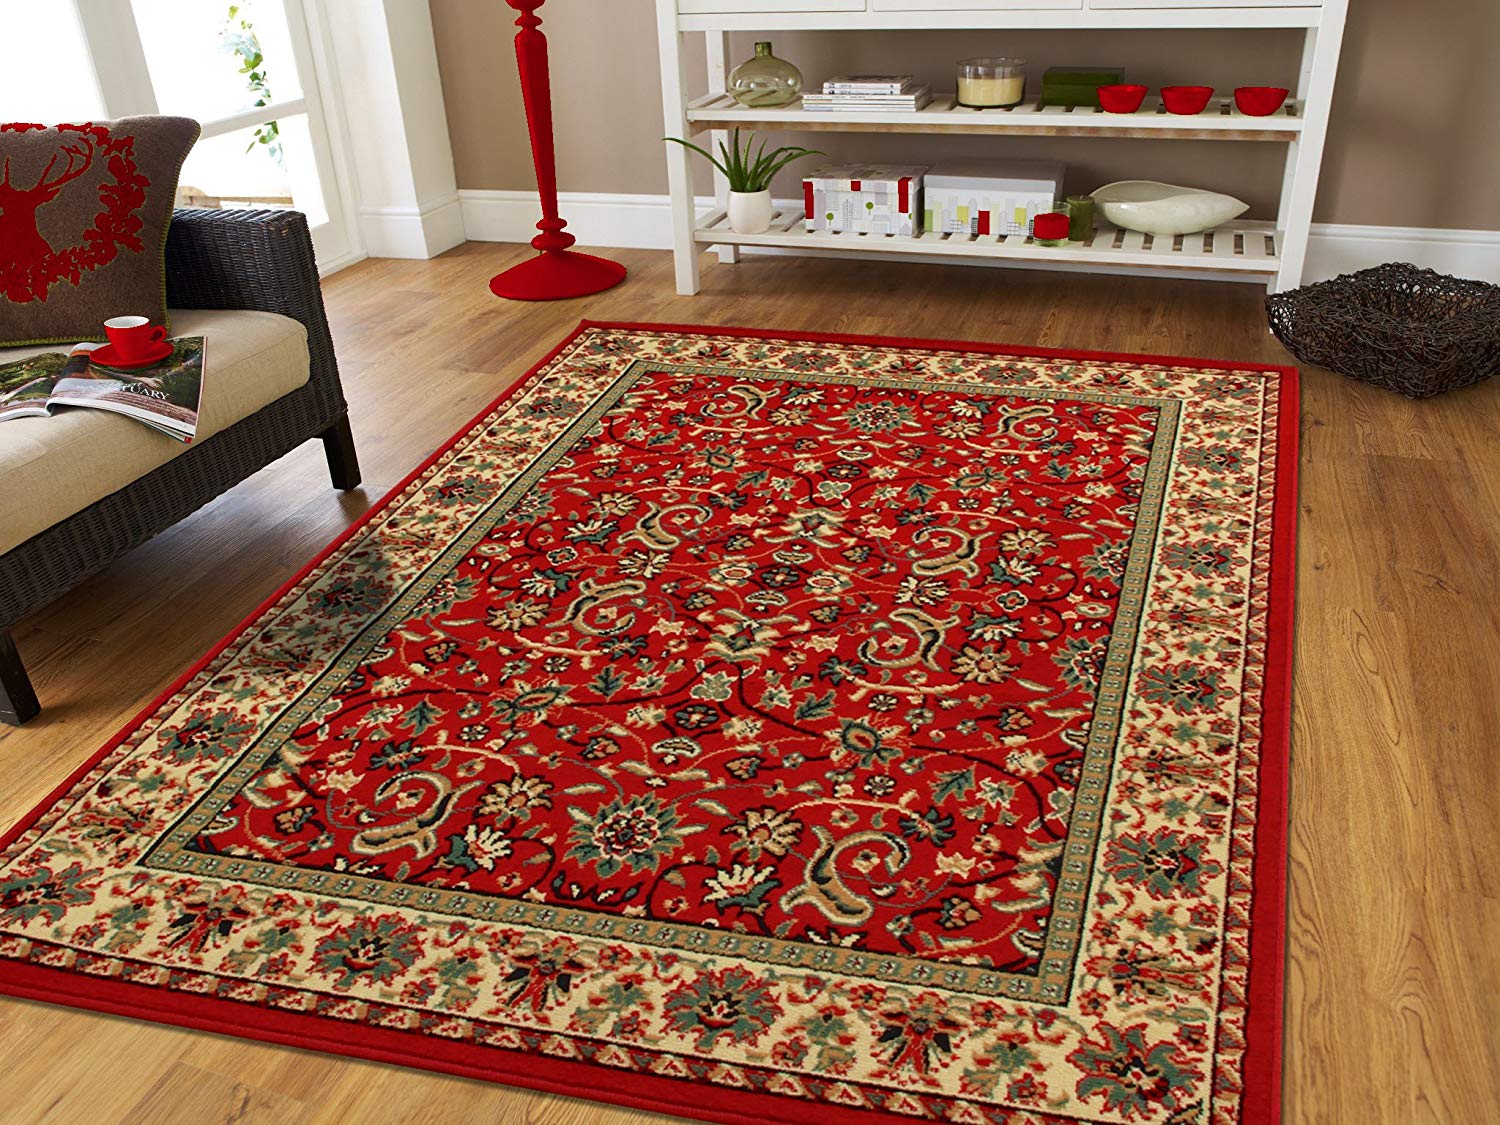 amazon.com: large persian rugs for living room 8x11 red green beige BVIESDT